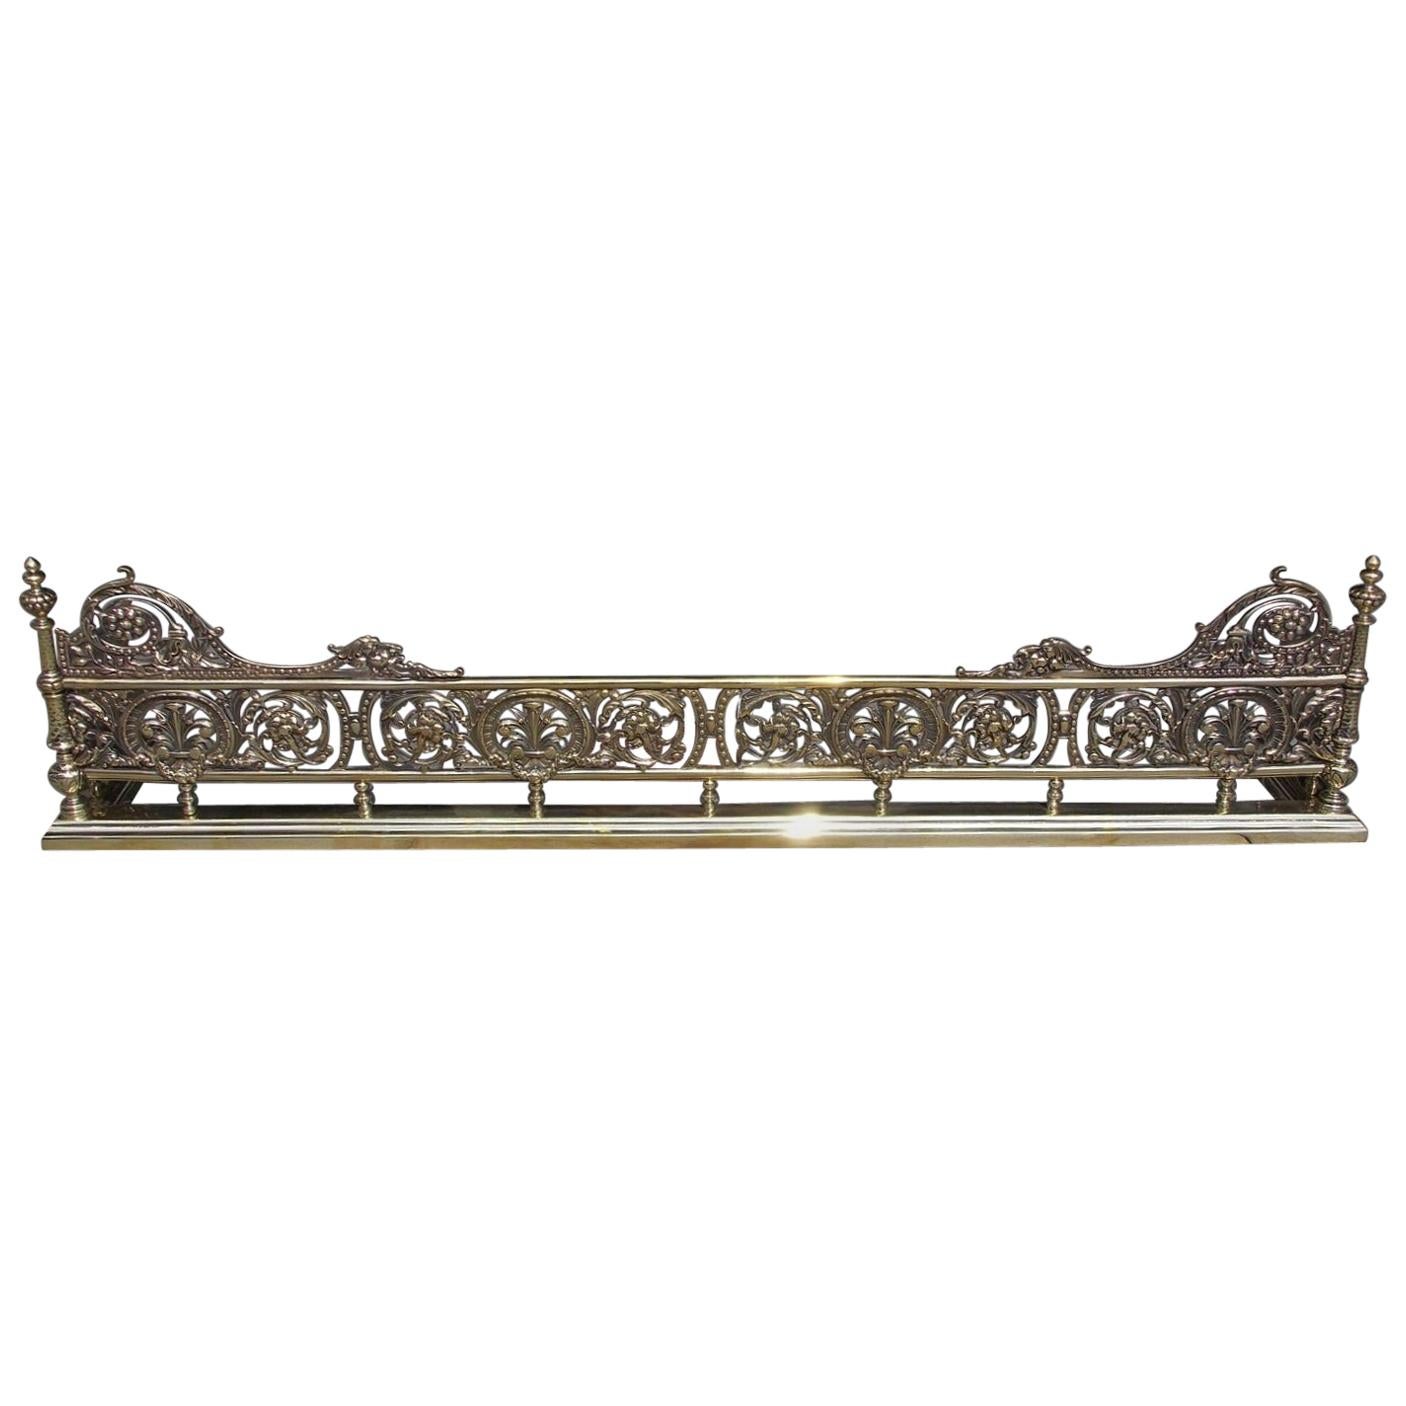 English Brass Gallery Foliage Fire Place Fender with Flanking Finials. C. 1820 For Sale